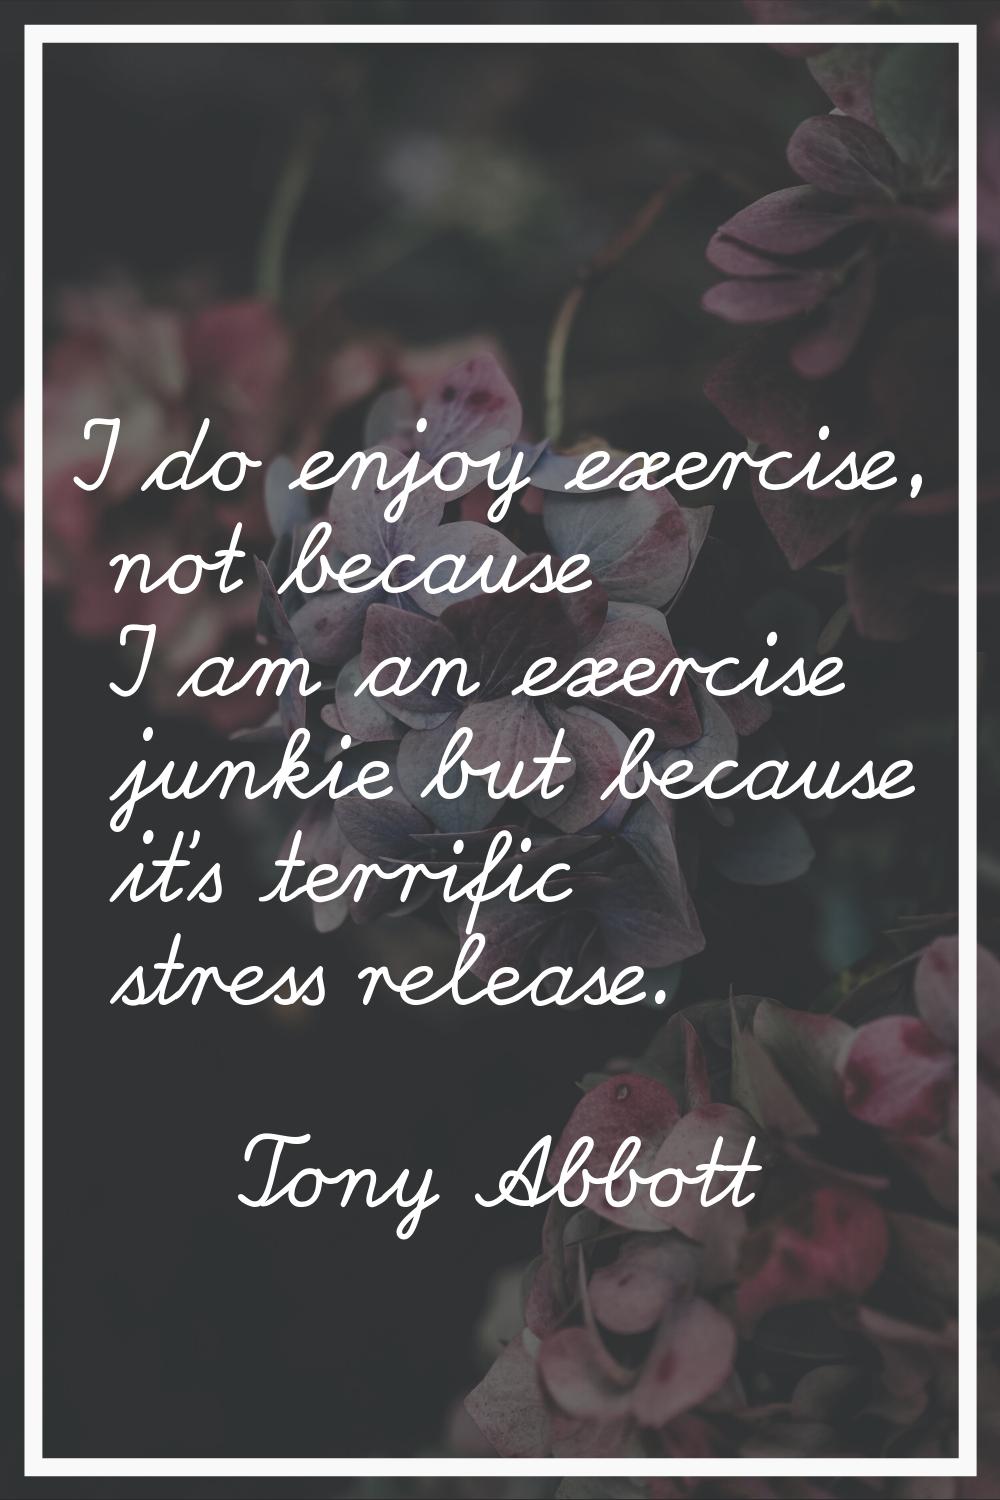 I do enjoy exercise, not because I am an exercise junkie but because it's terrific stress release.